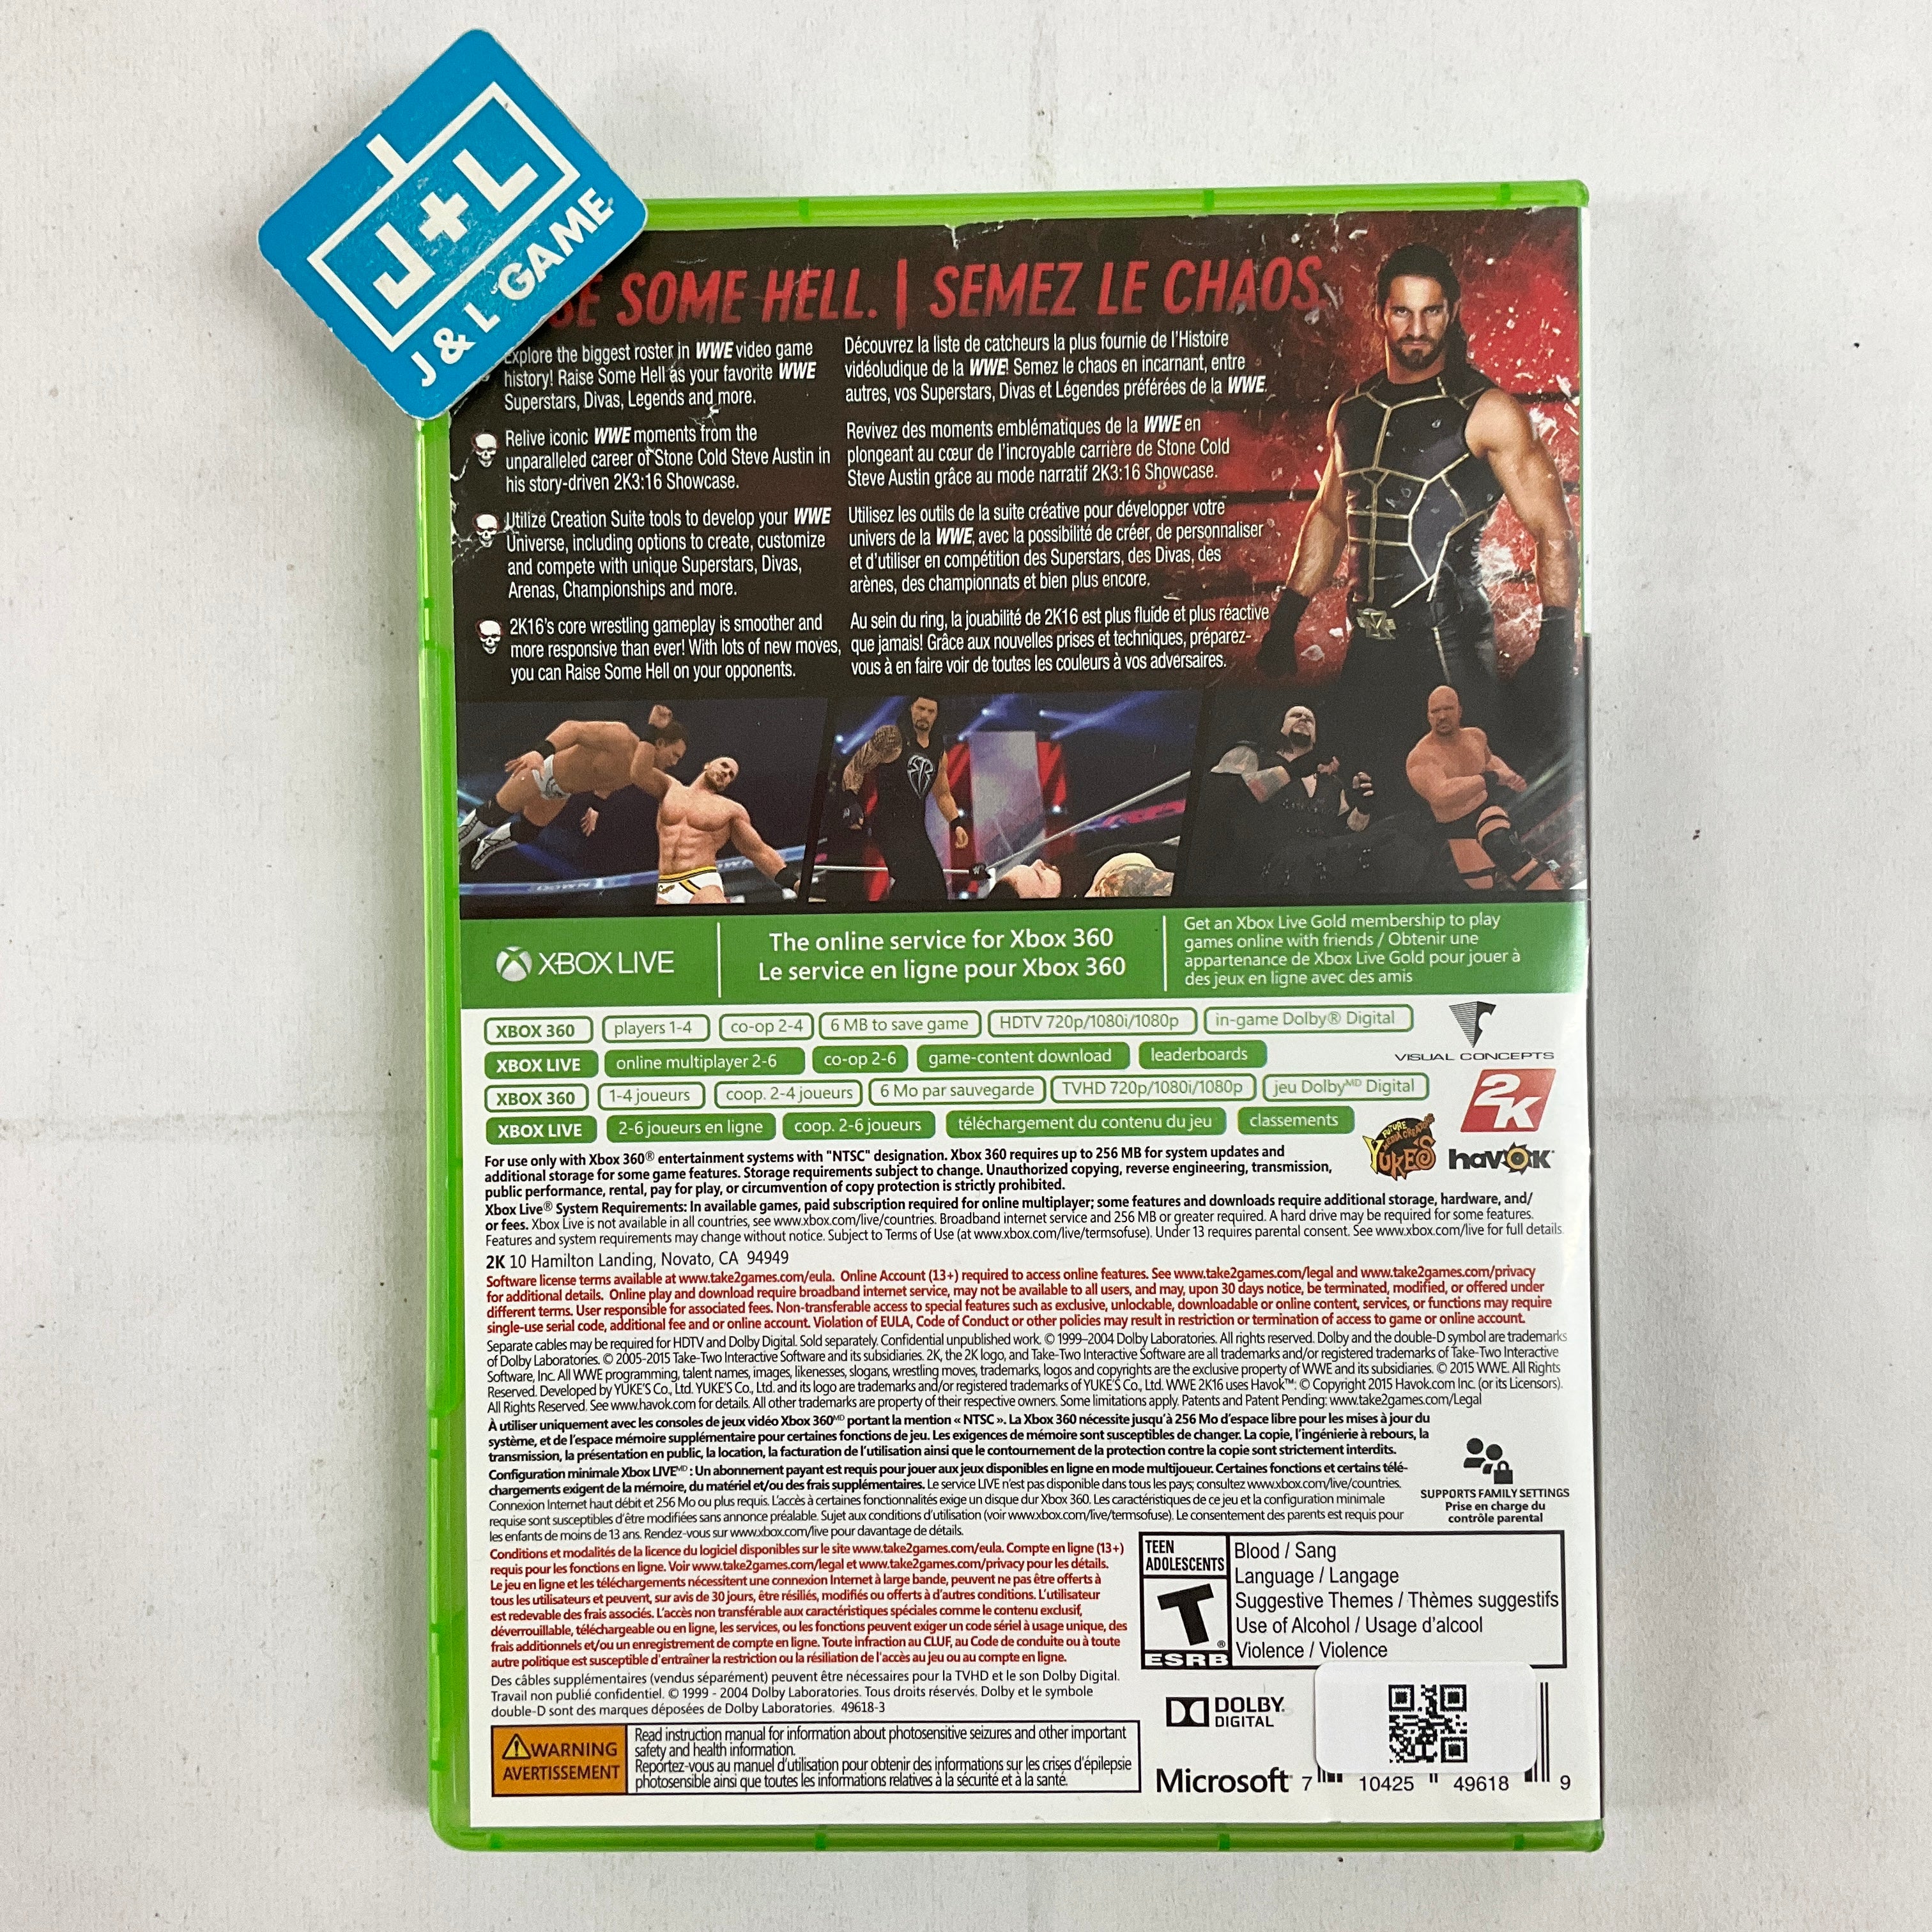 WWE 2K16 - Xbox 360 [Pre-Owned] Video Games 2K Games   